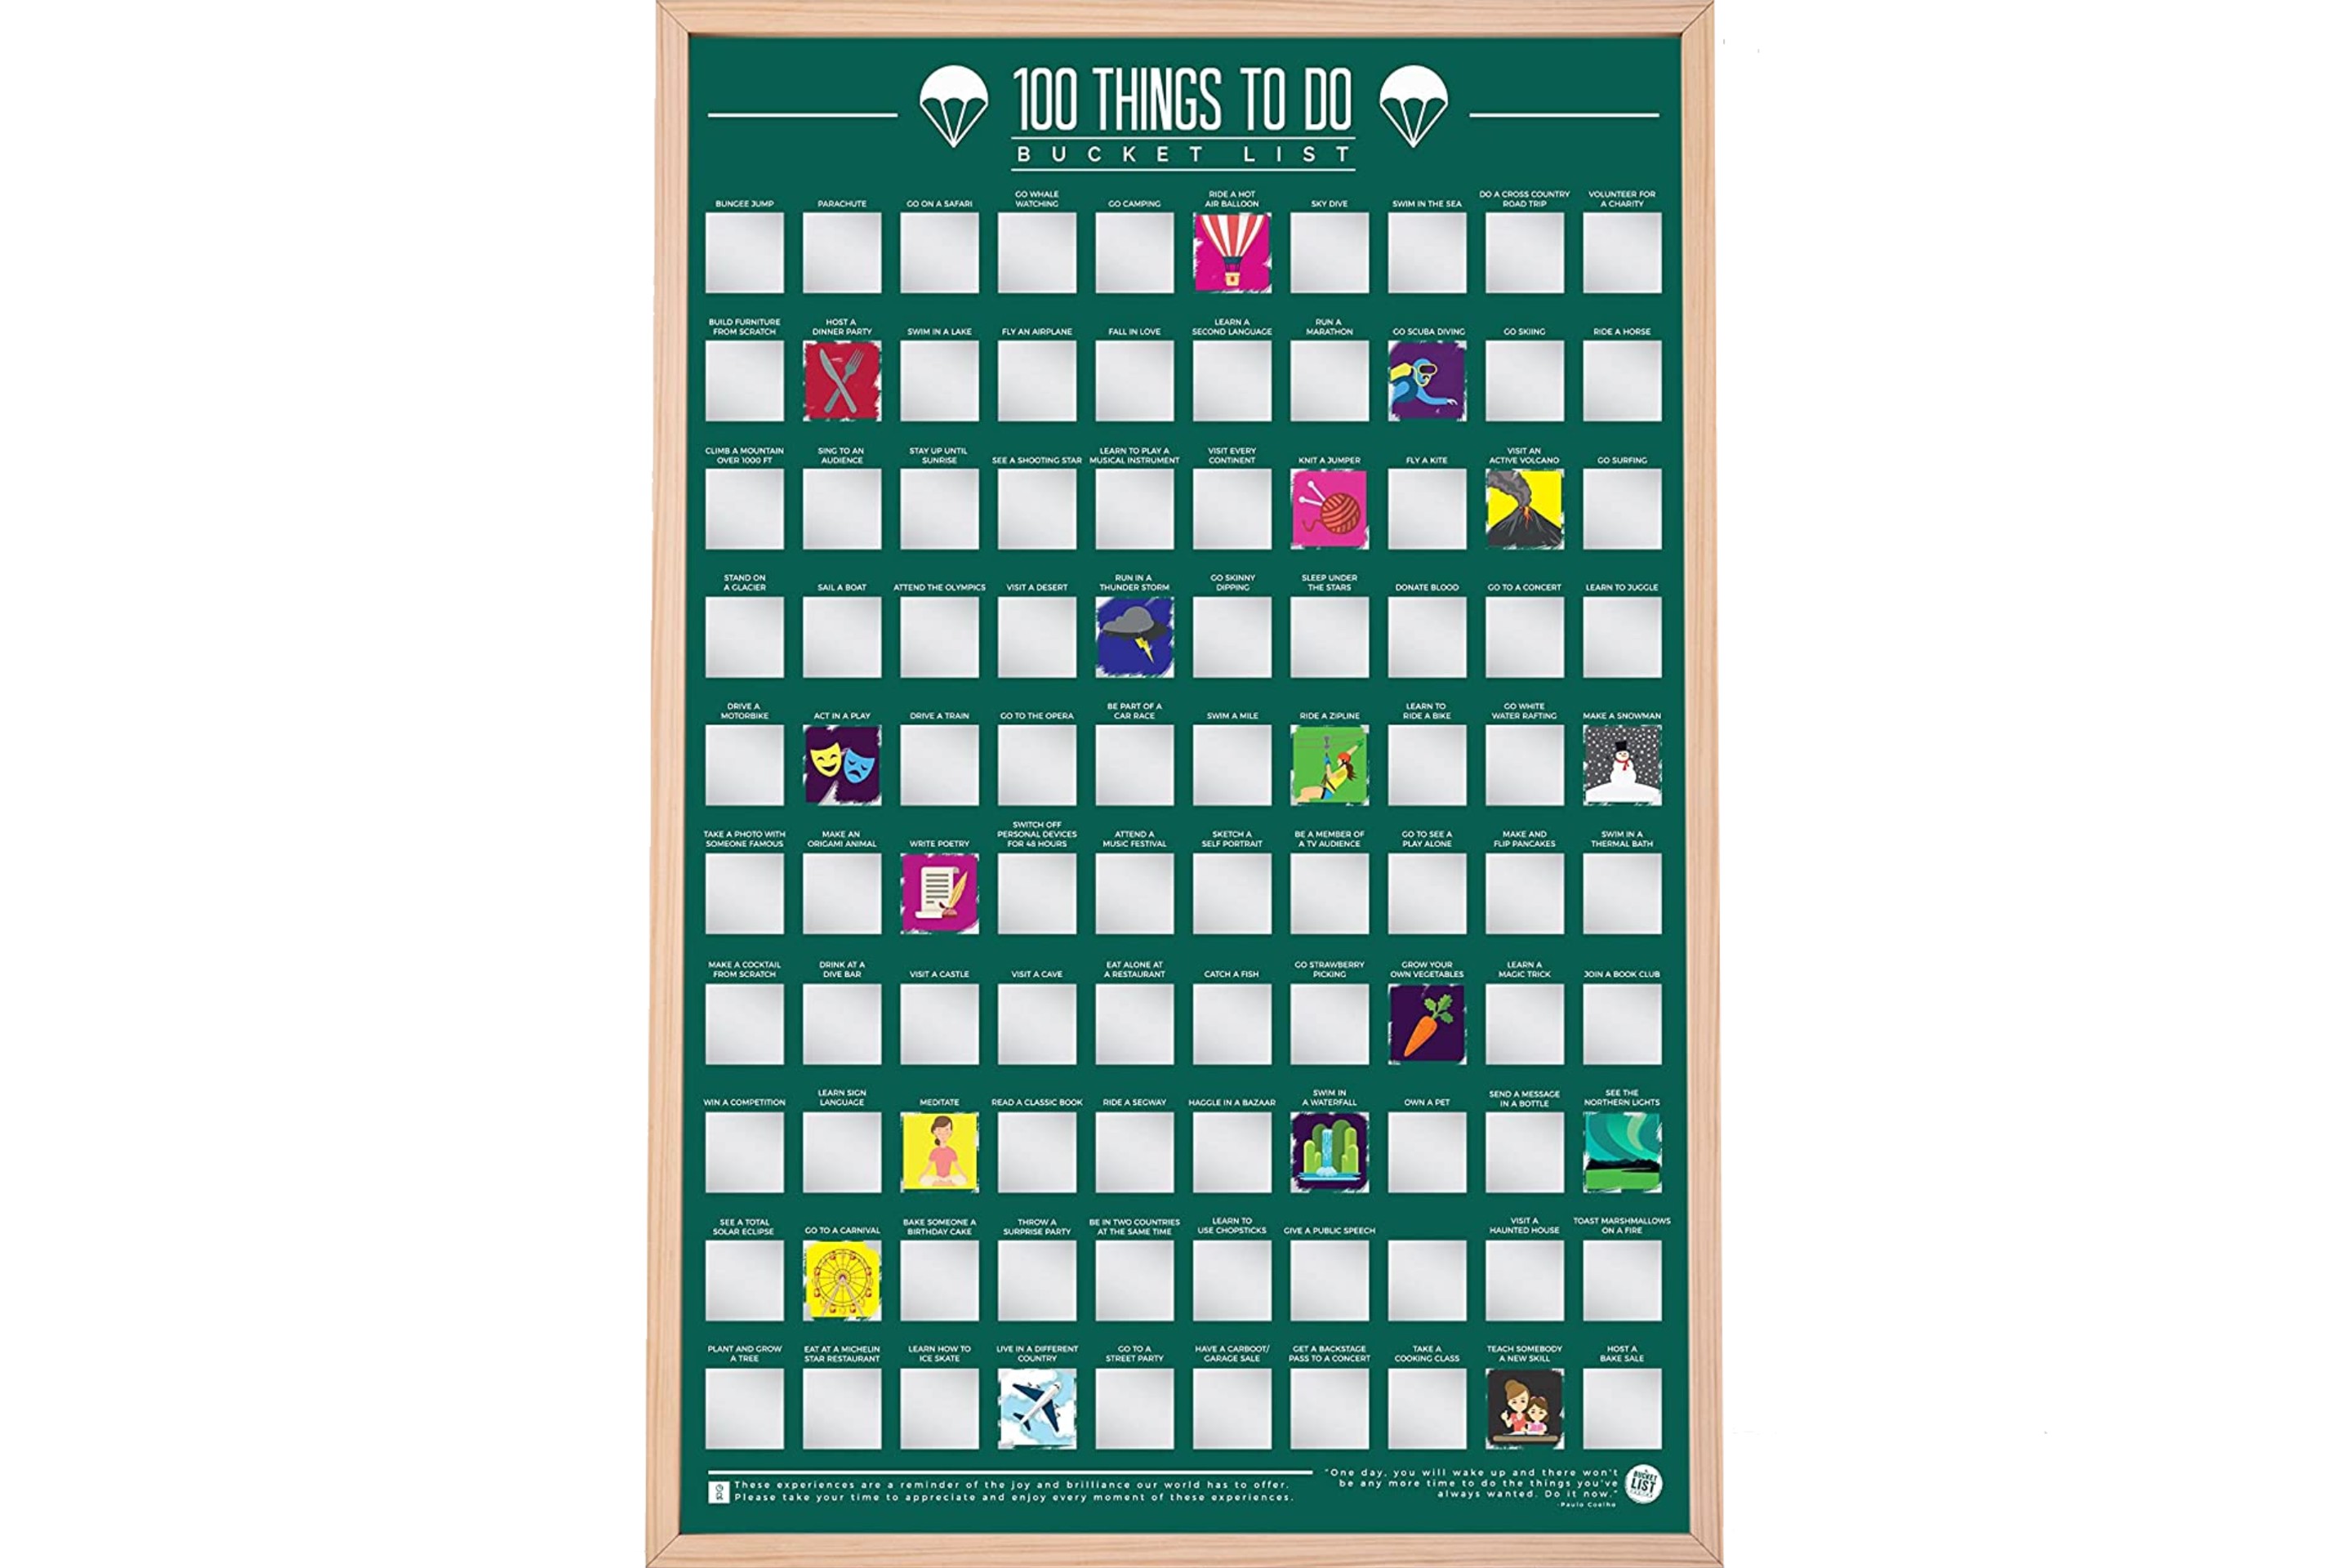 100 Things To Do Bucket List Scratch-Off Poster